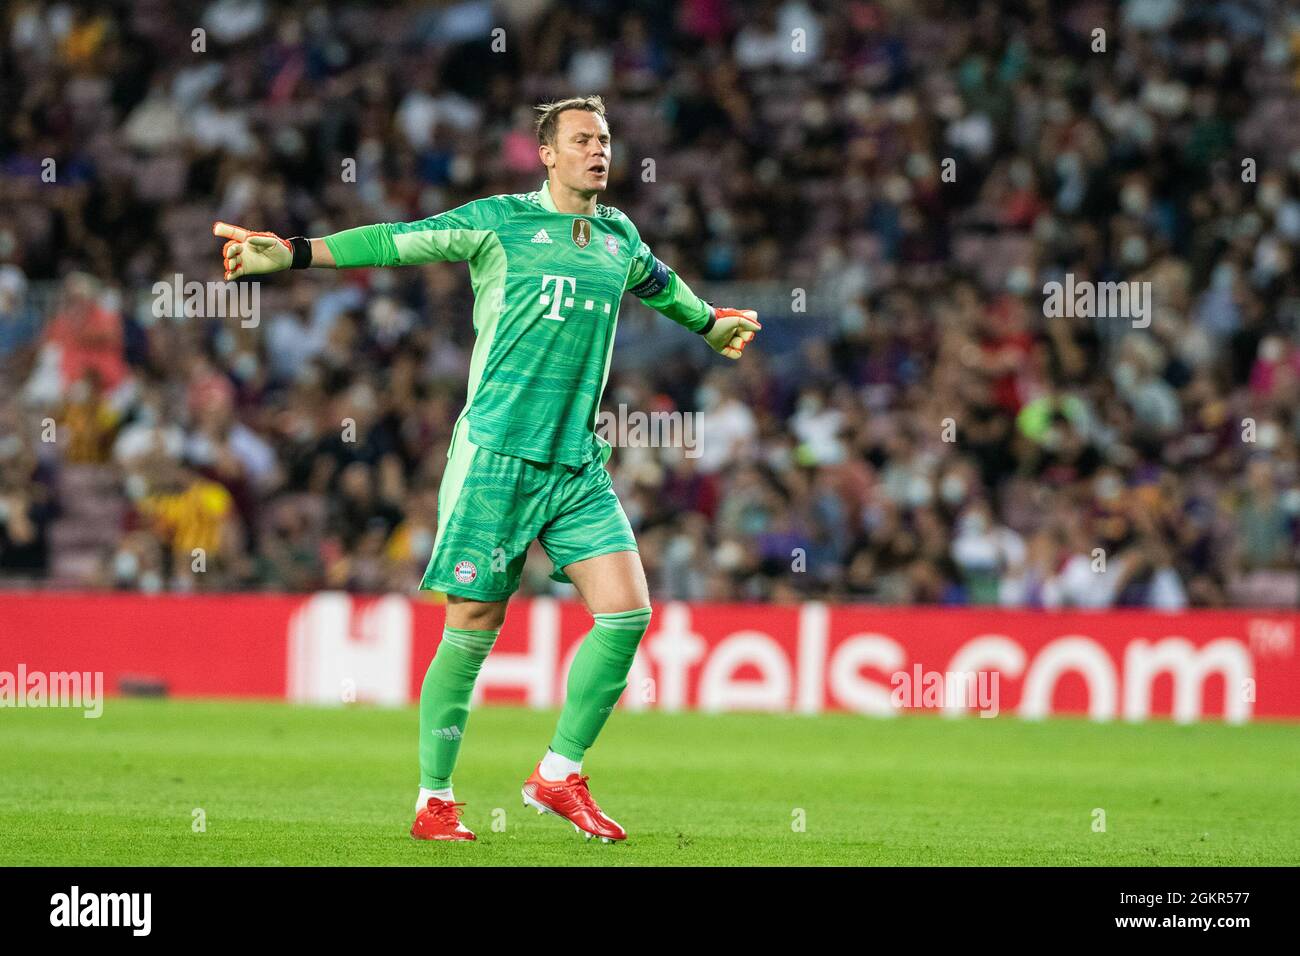 Barcelona, Spain, September 14, 2021, Manuel Neuer of Bayer Munich celebrating a goal scored by Thomas Muller during the UEFA Champions League, football match played between FC Barcelona and Bayern Munich at Camp Nou Stadium on September 14, 2021, in Barcelona, Spain - Photo: Marc Gonzalez Aloma/DPPI/LiveMedia Stock Photo